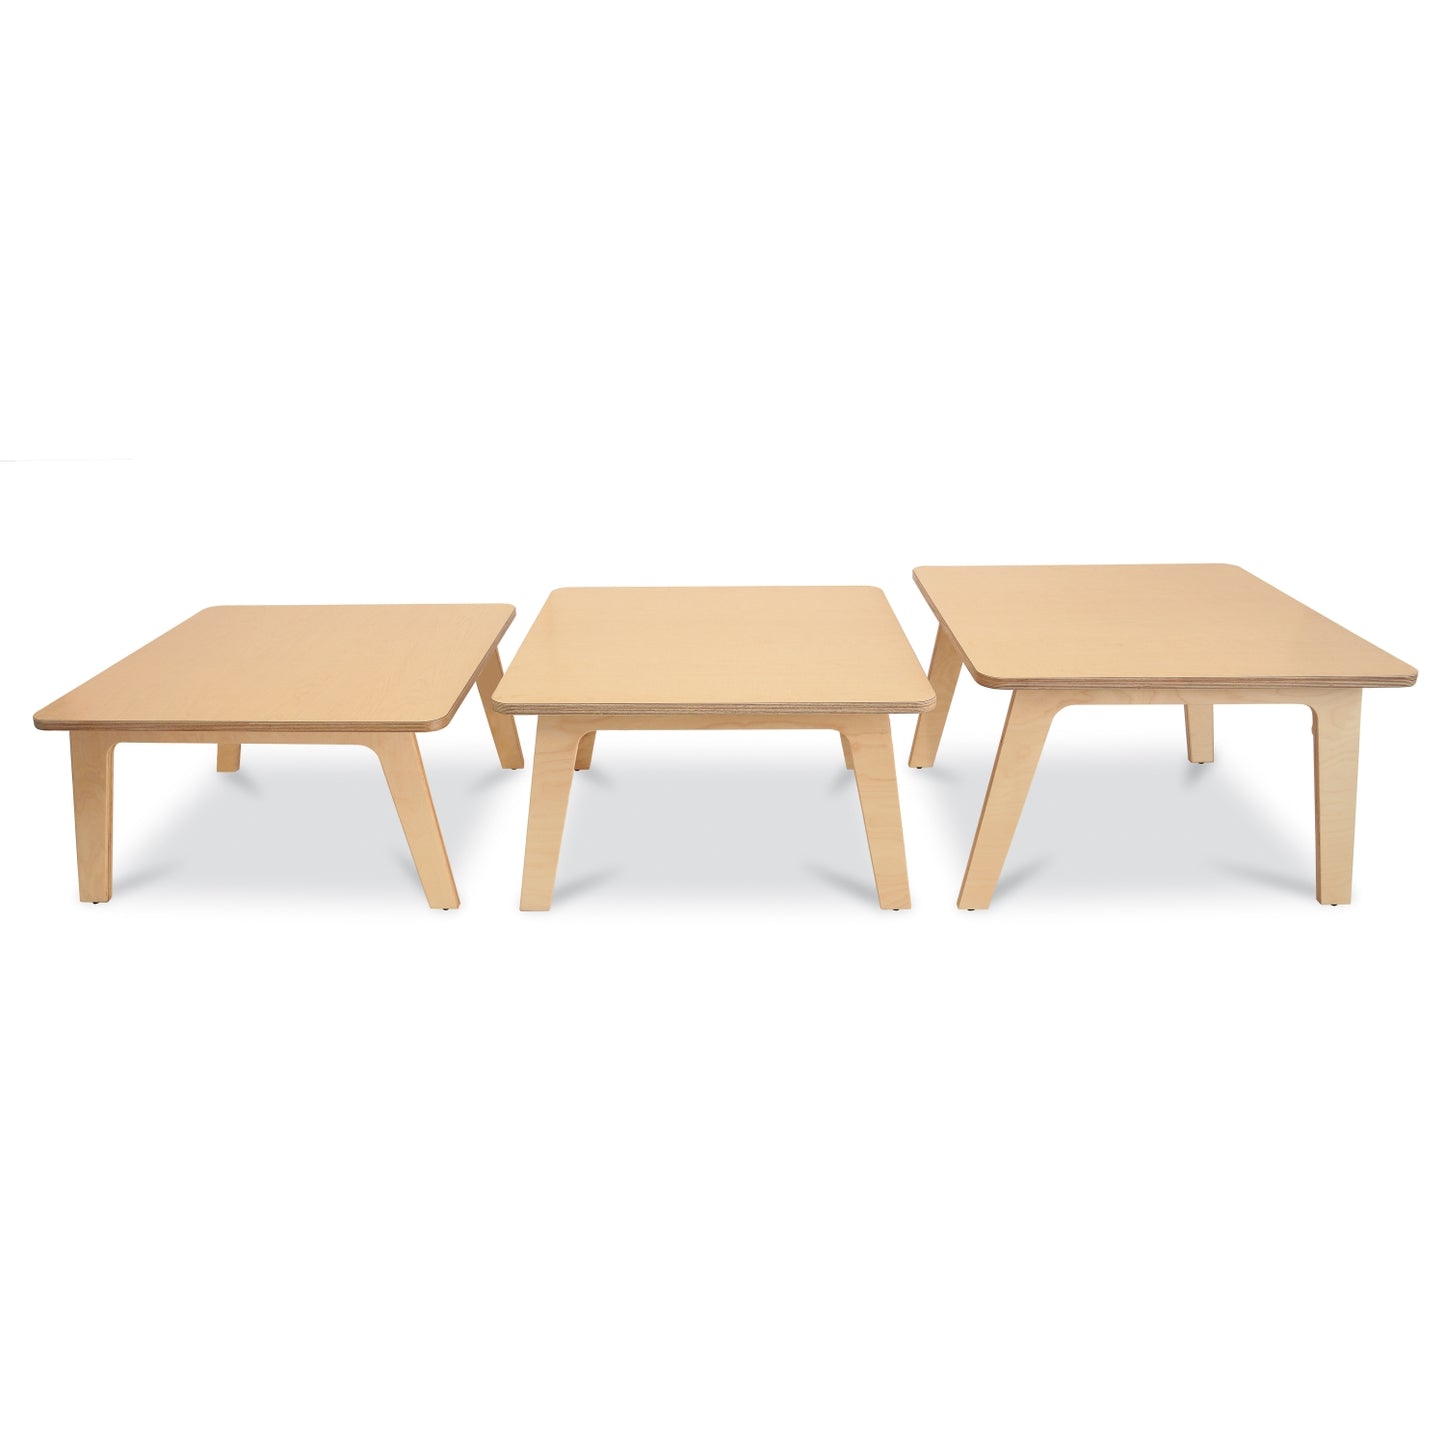 Whitney Plus Square Table - 20H